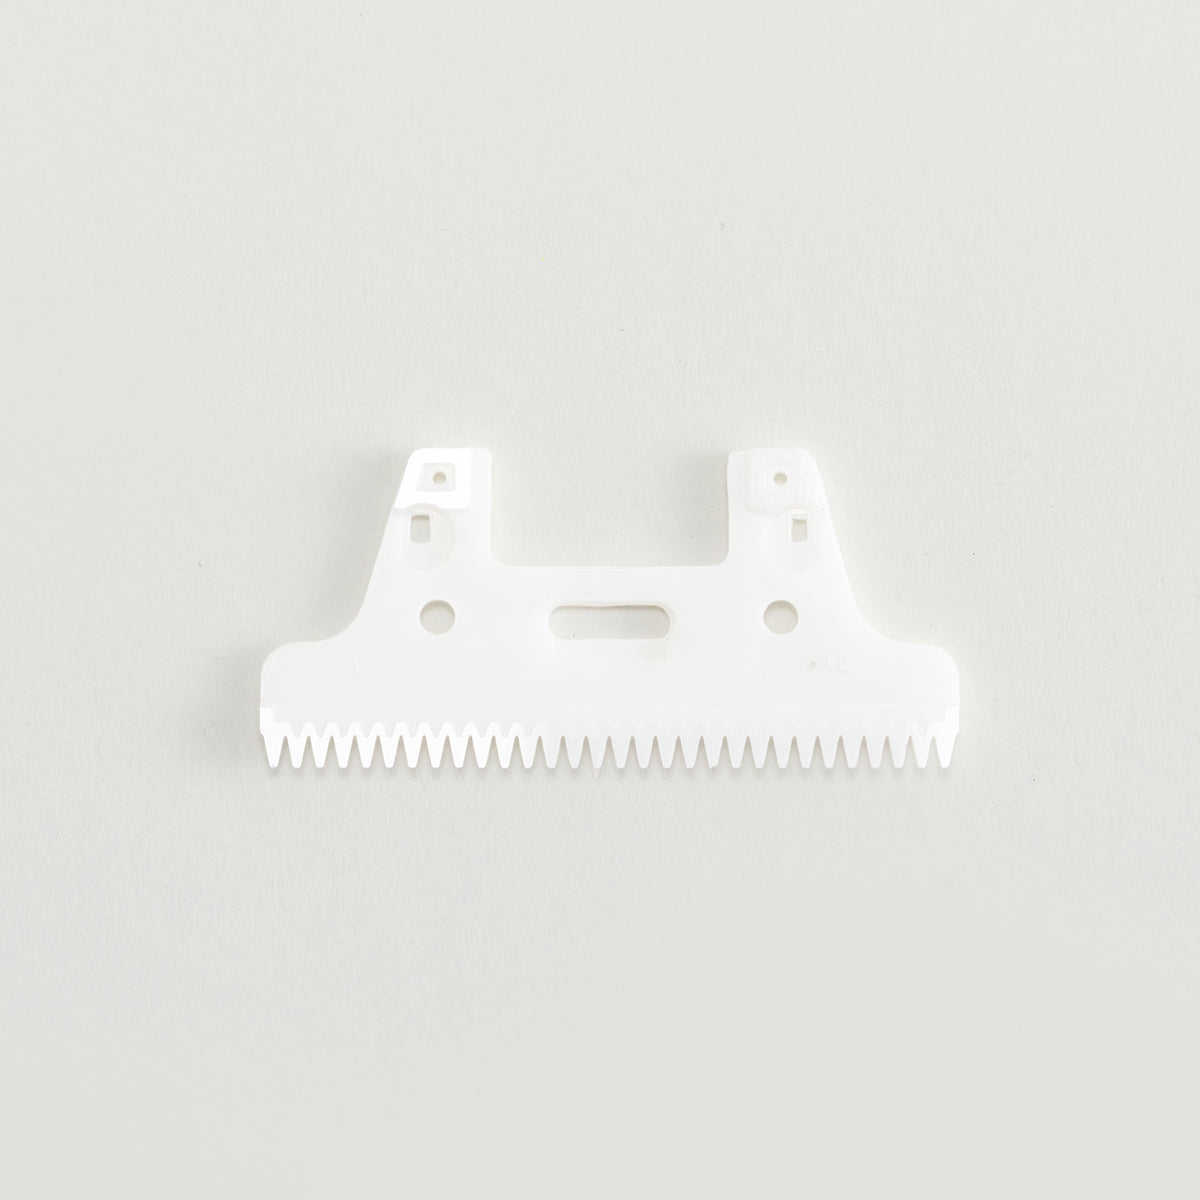 Ceramic Trimmer Blade Replacement With 30 Teeth at Standard Depth